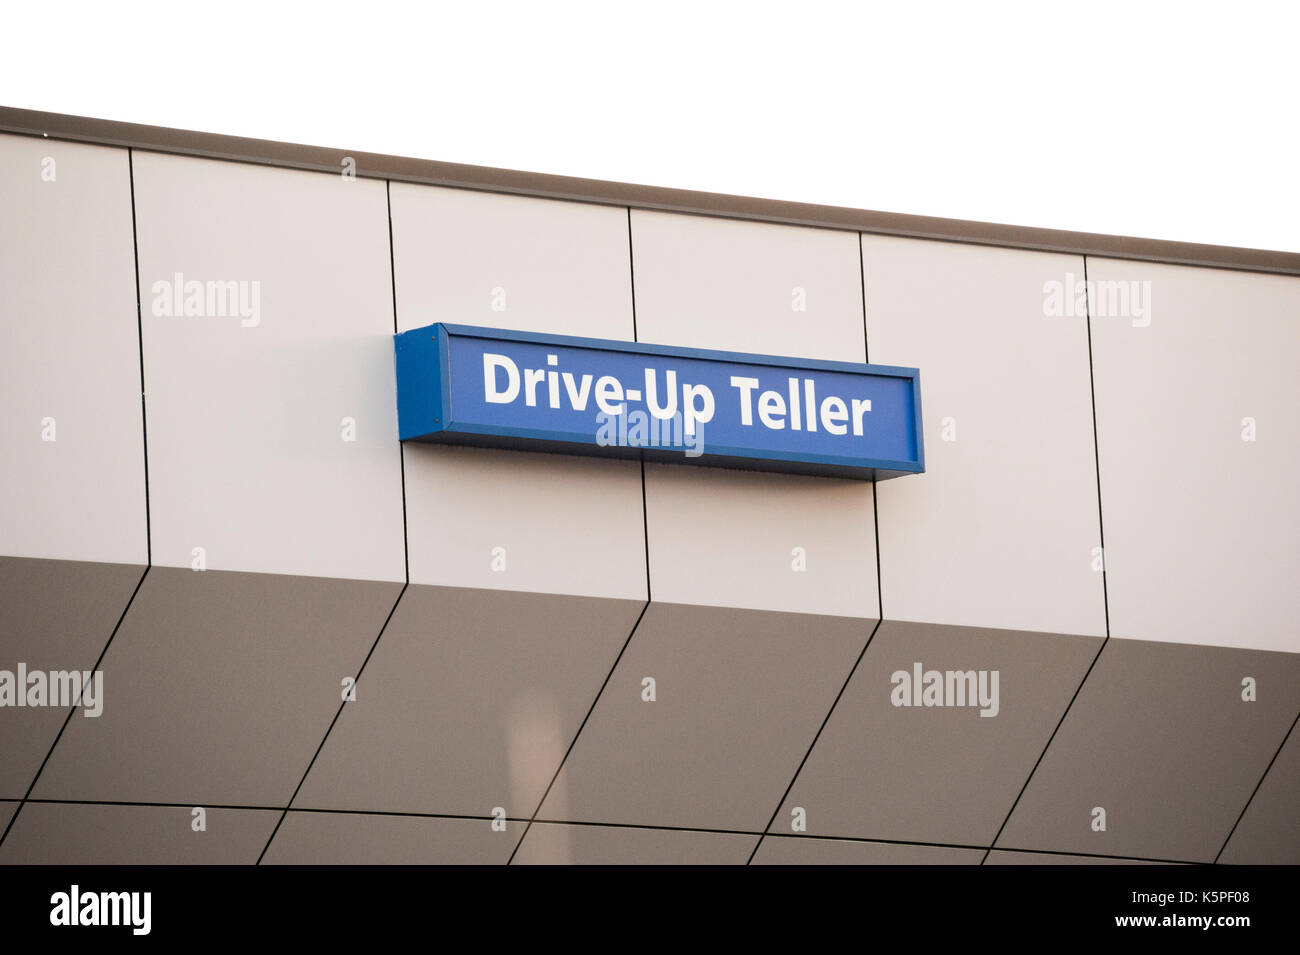 Drive-up teller sign Stock Photo